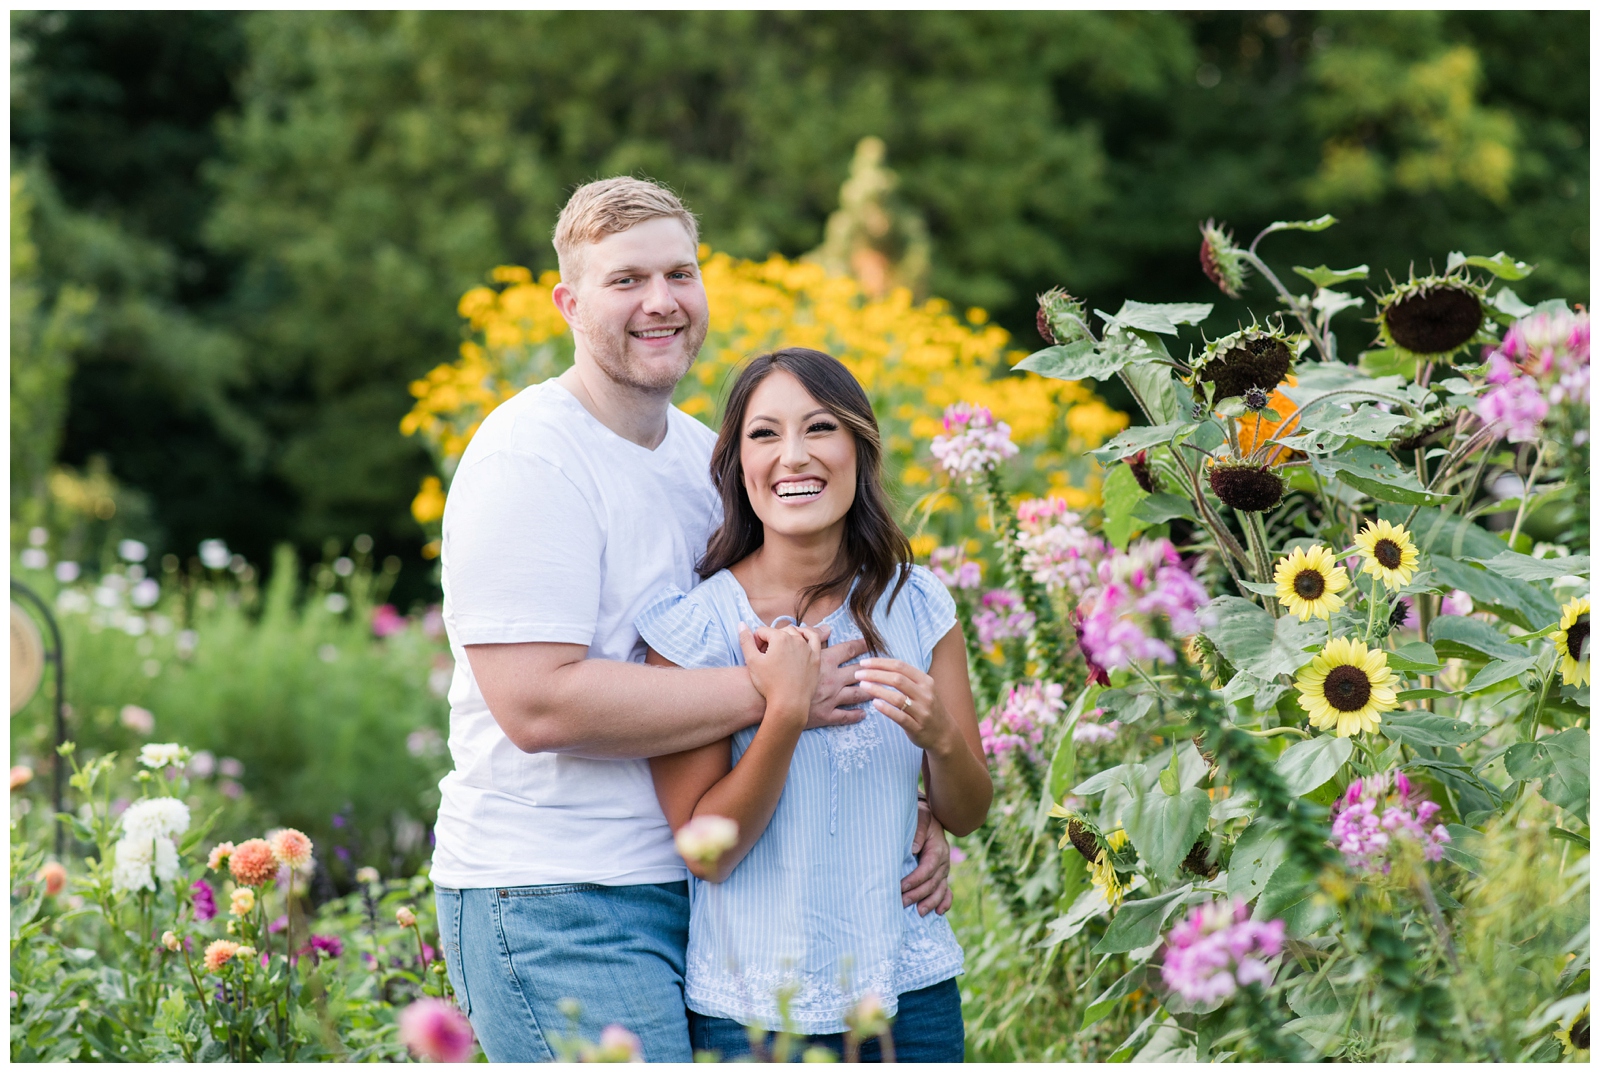 engaged couple happily looking at the camera surrounded by flowers in a garden 